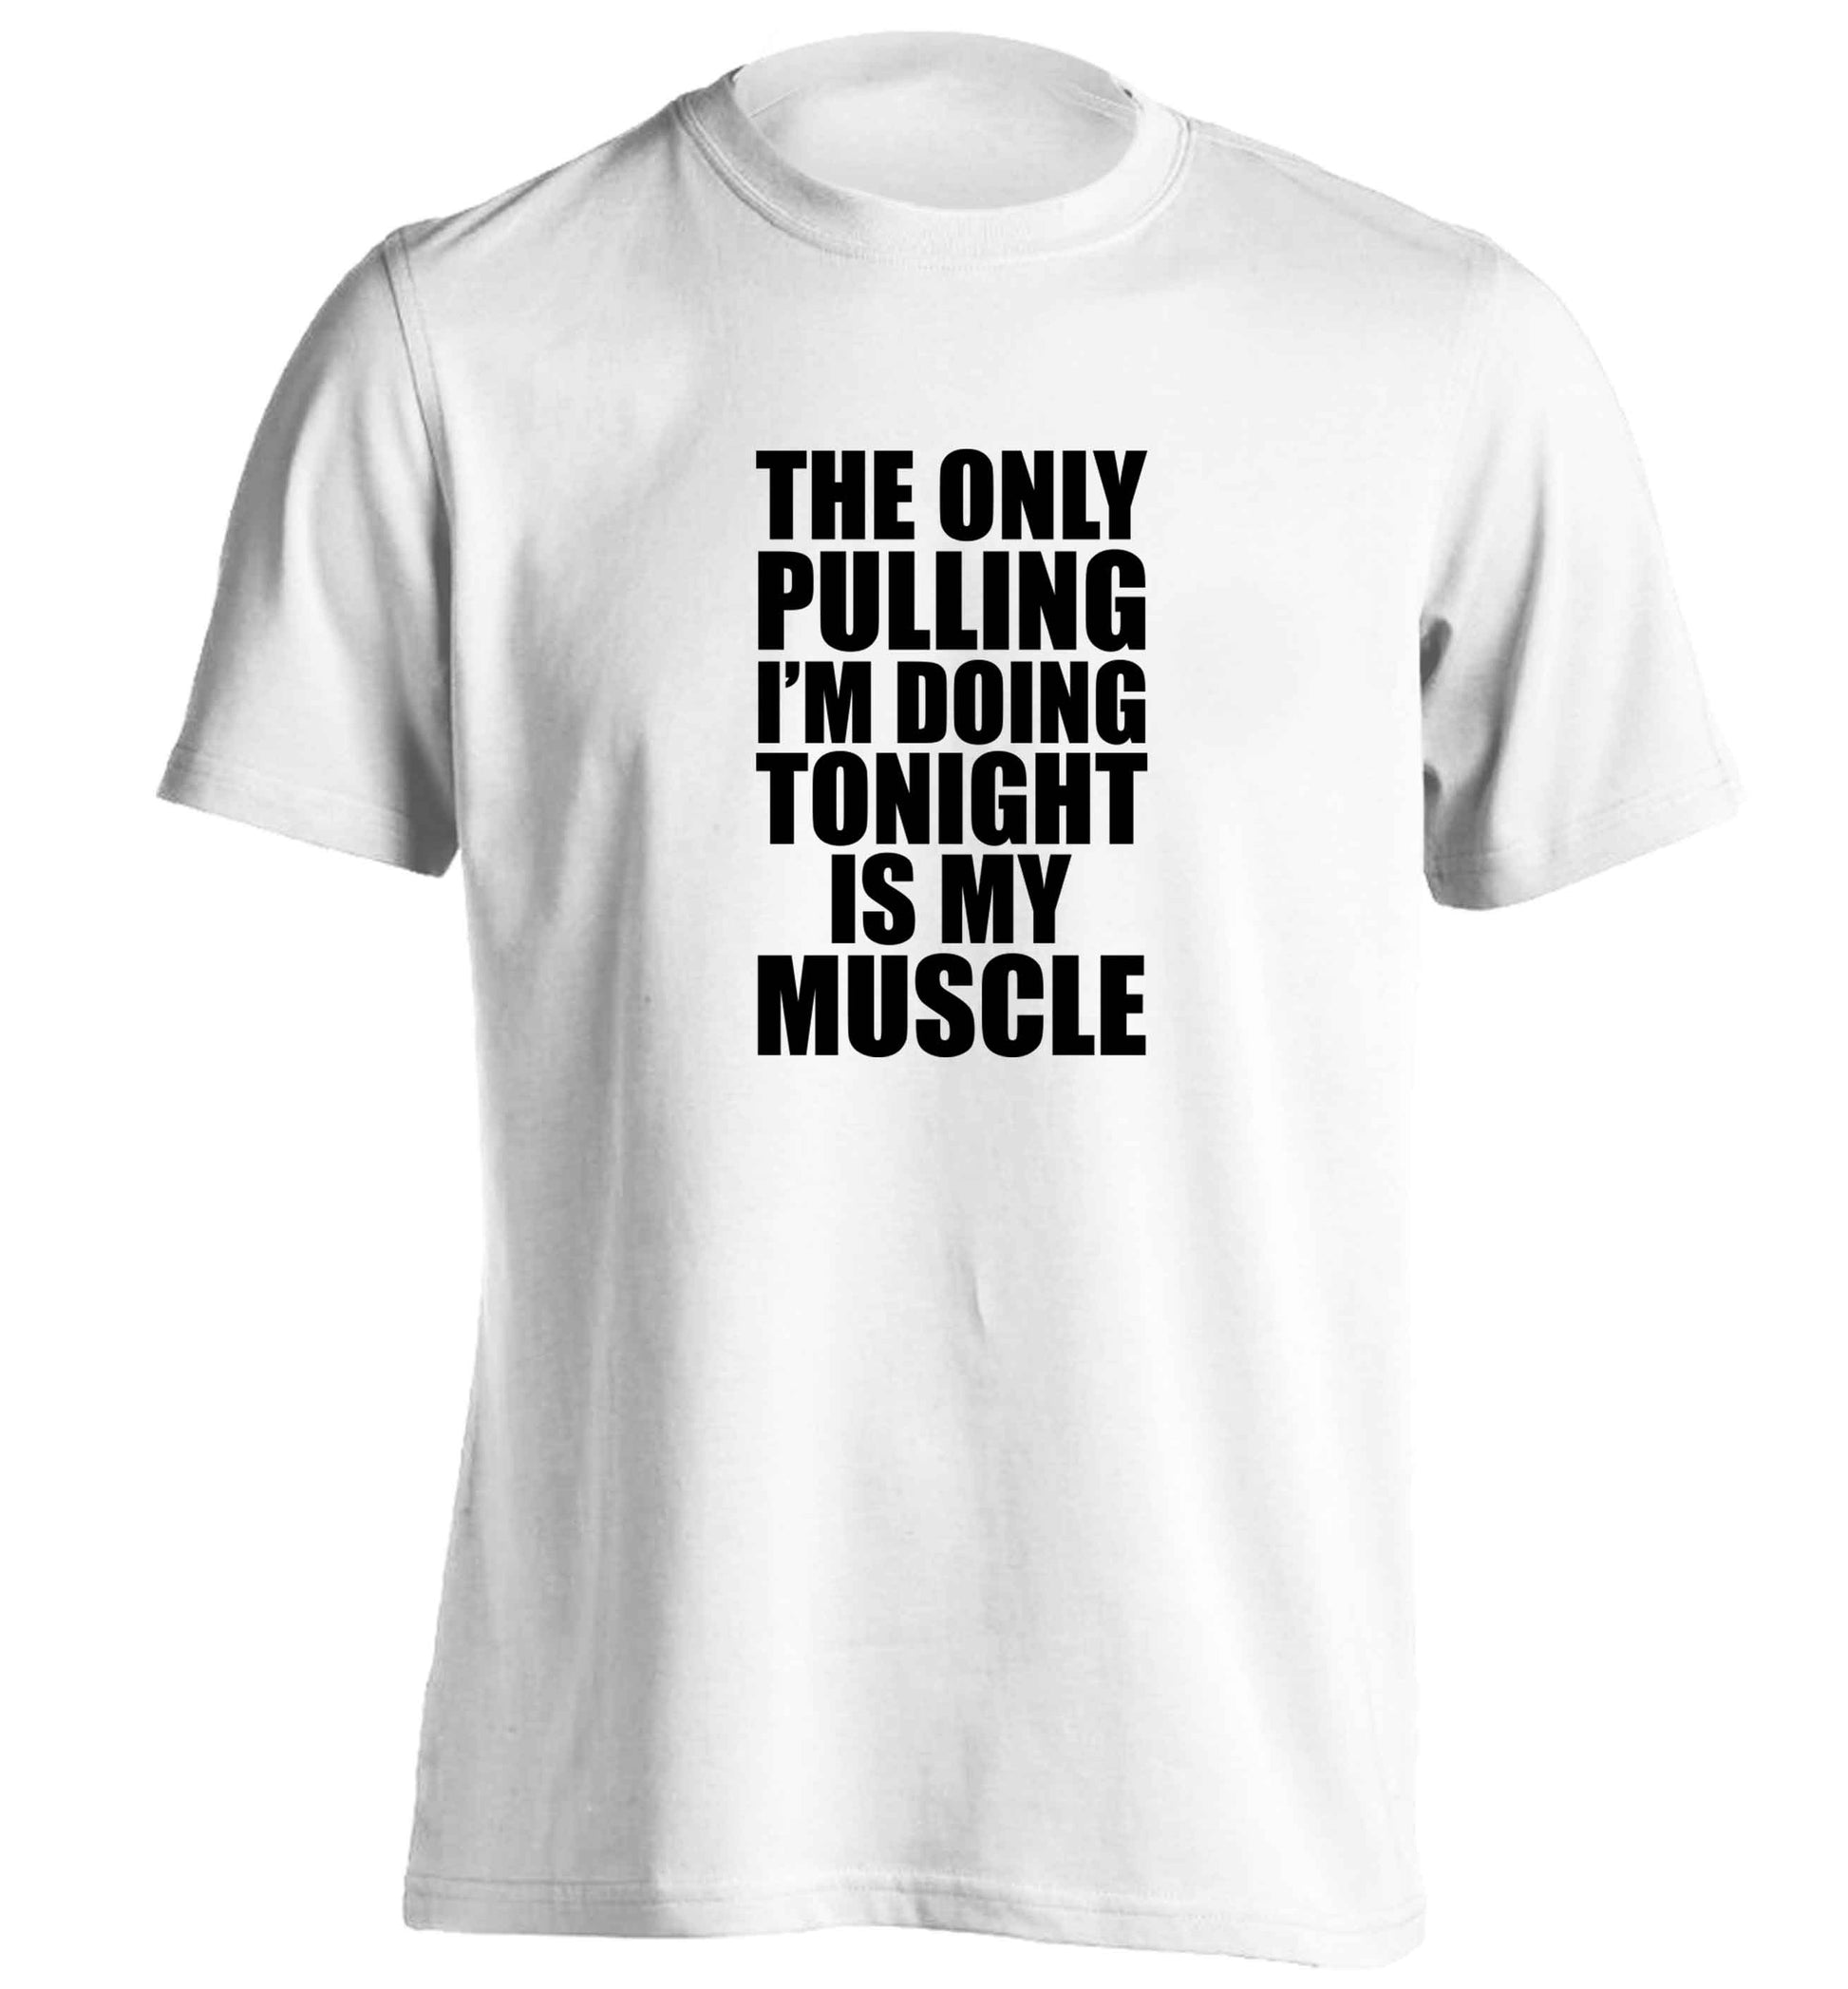 The only pulling I'm doing tonight is my muscle adults unisex white Tshirt 2XL